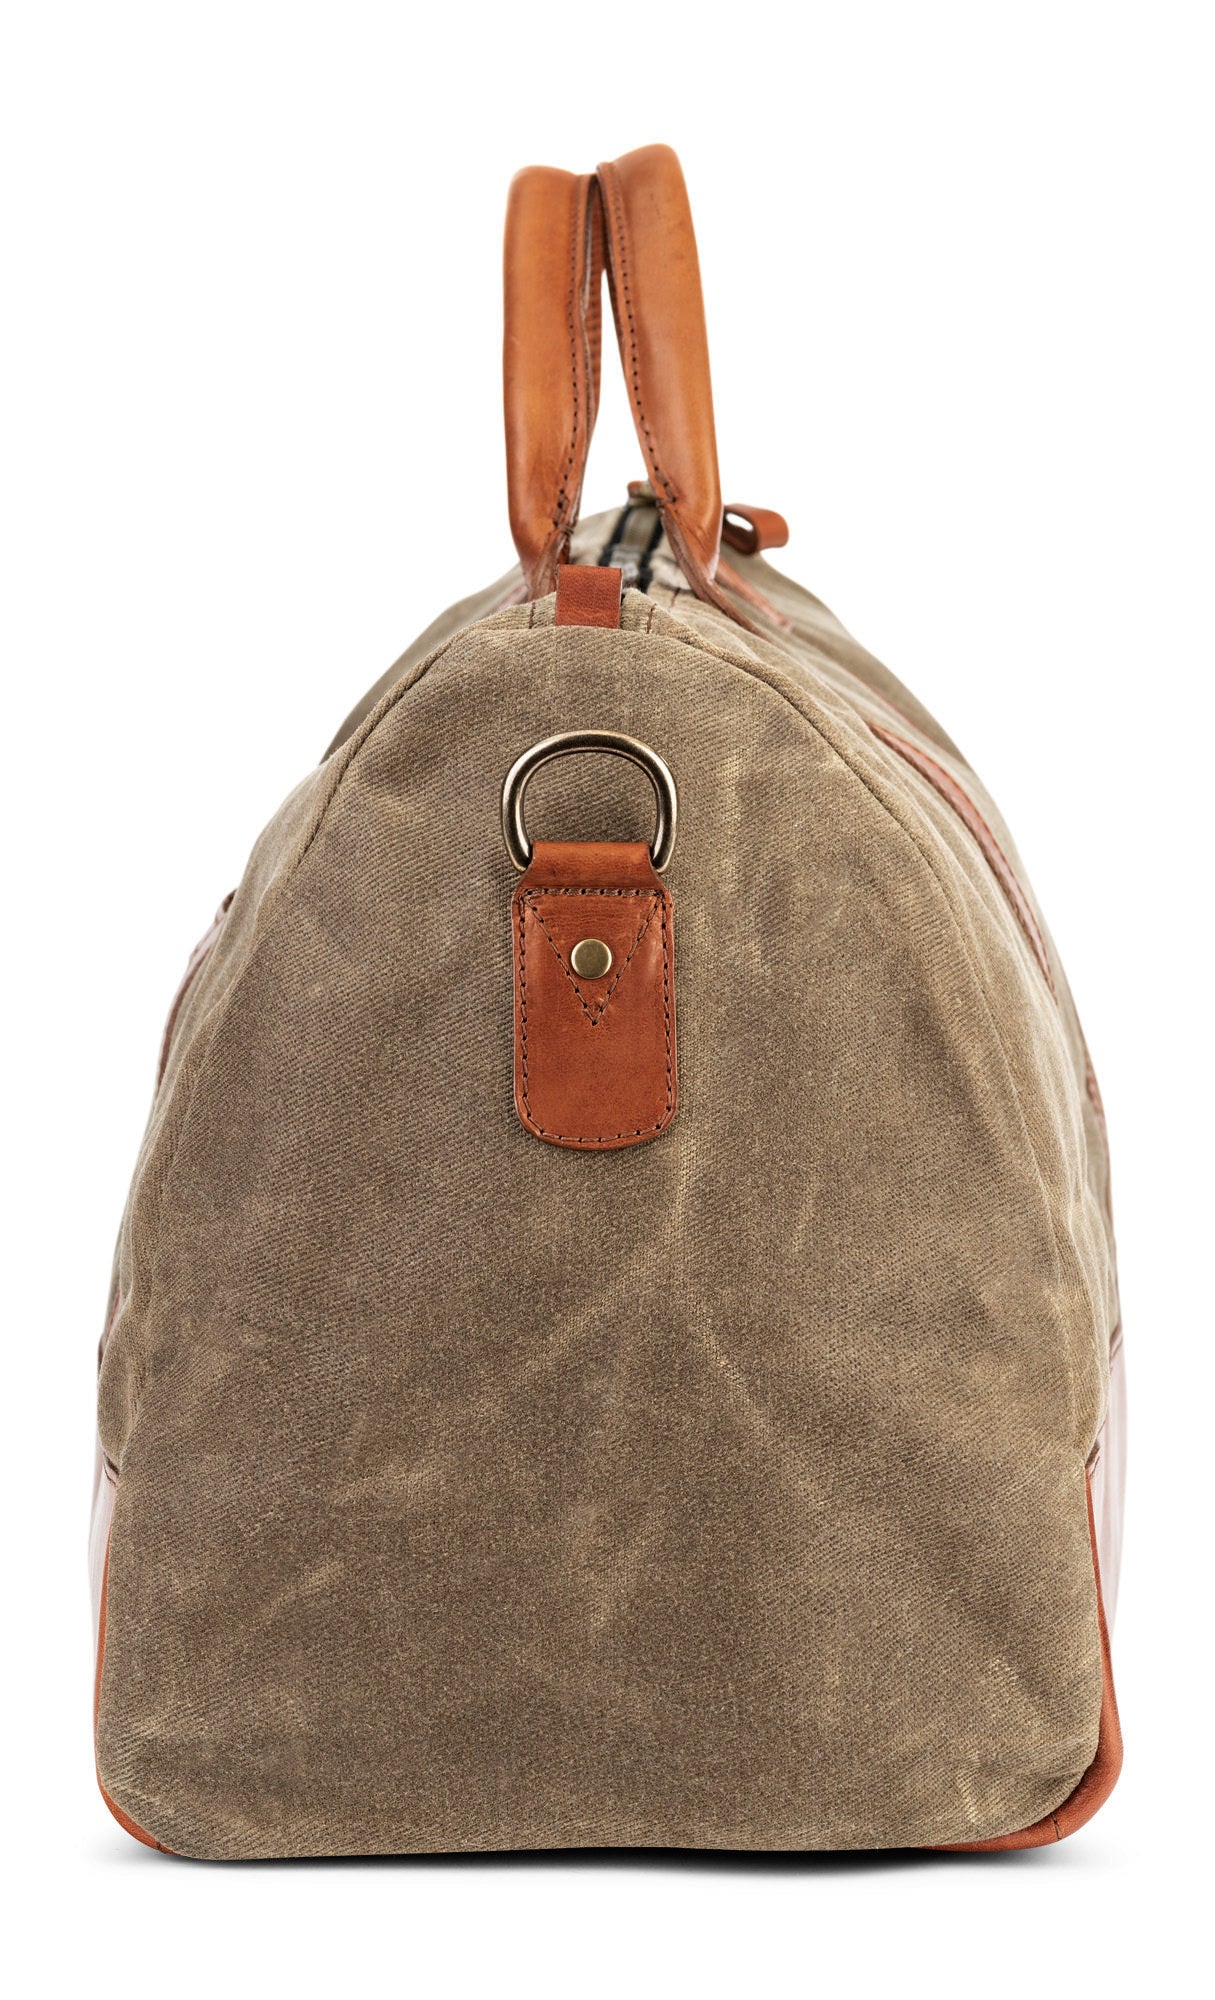 Full Grain Leather Duffle Bag Made in USA of Vegetable Tanned Leather - Jackson Wayne Leather Goods